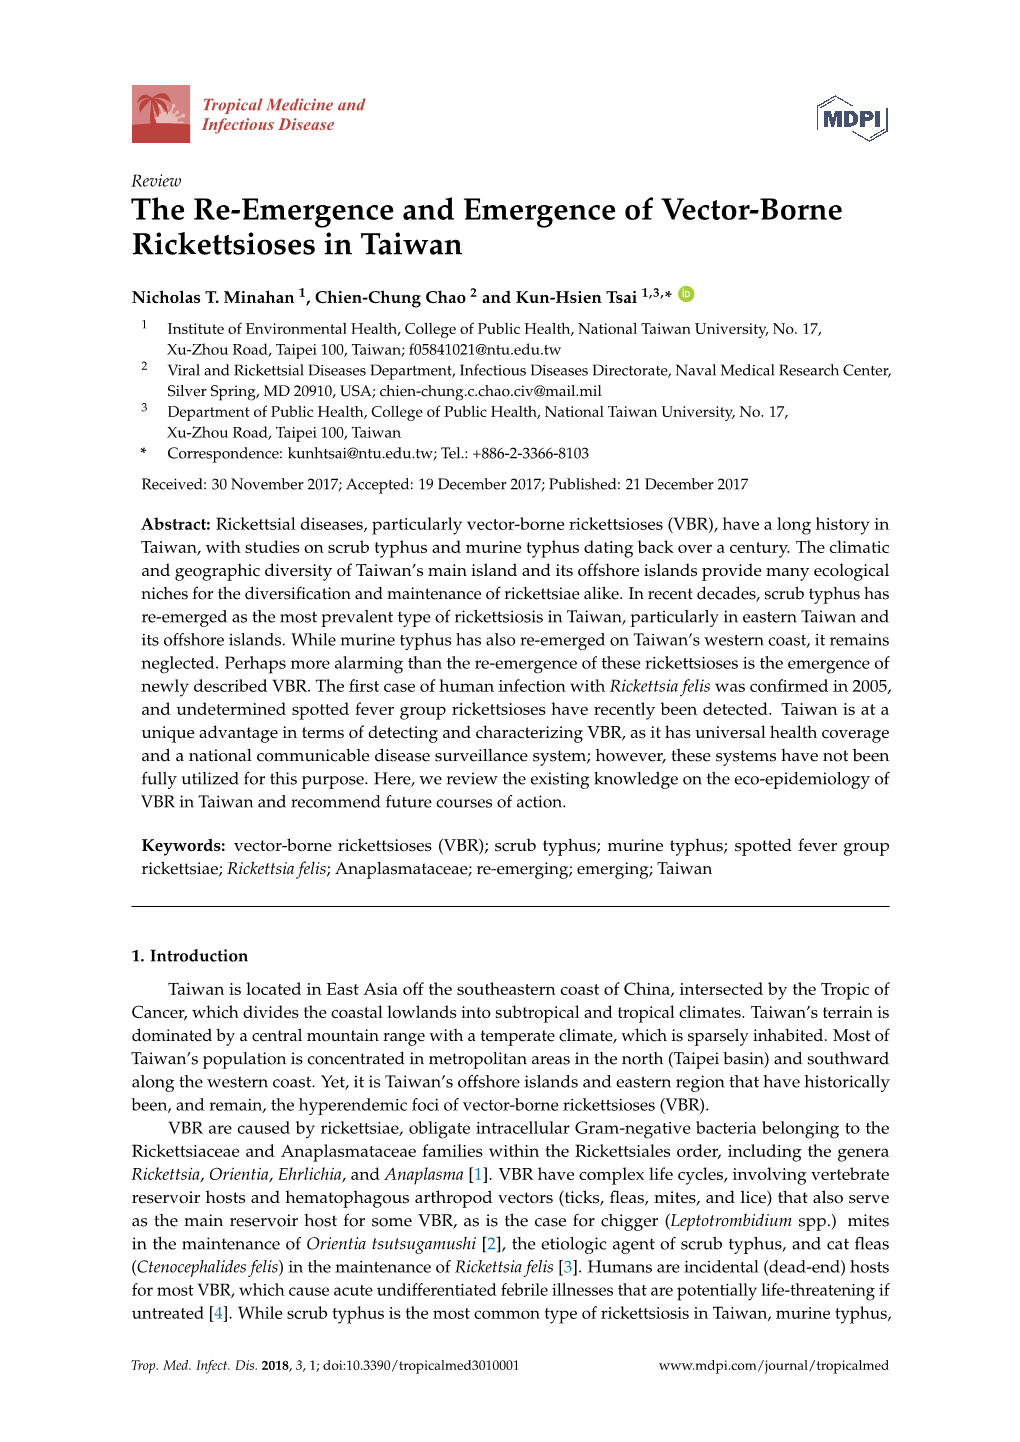 The Re-Emergence and Emergence of Vector-Borne Rickettsioses in Taiwan